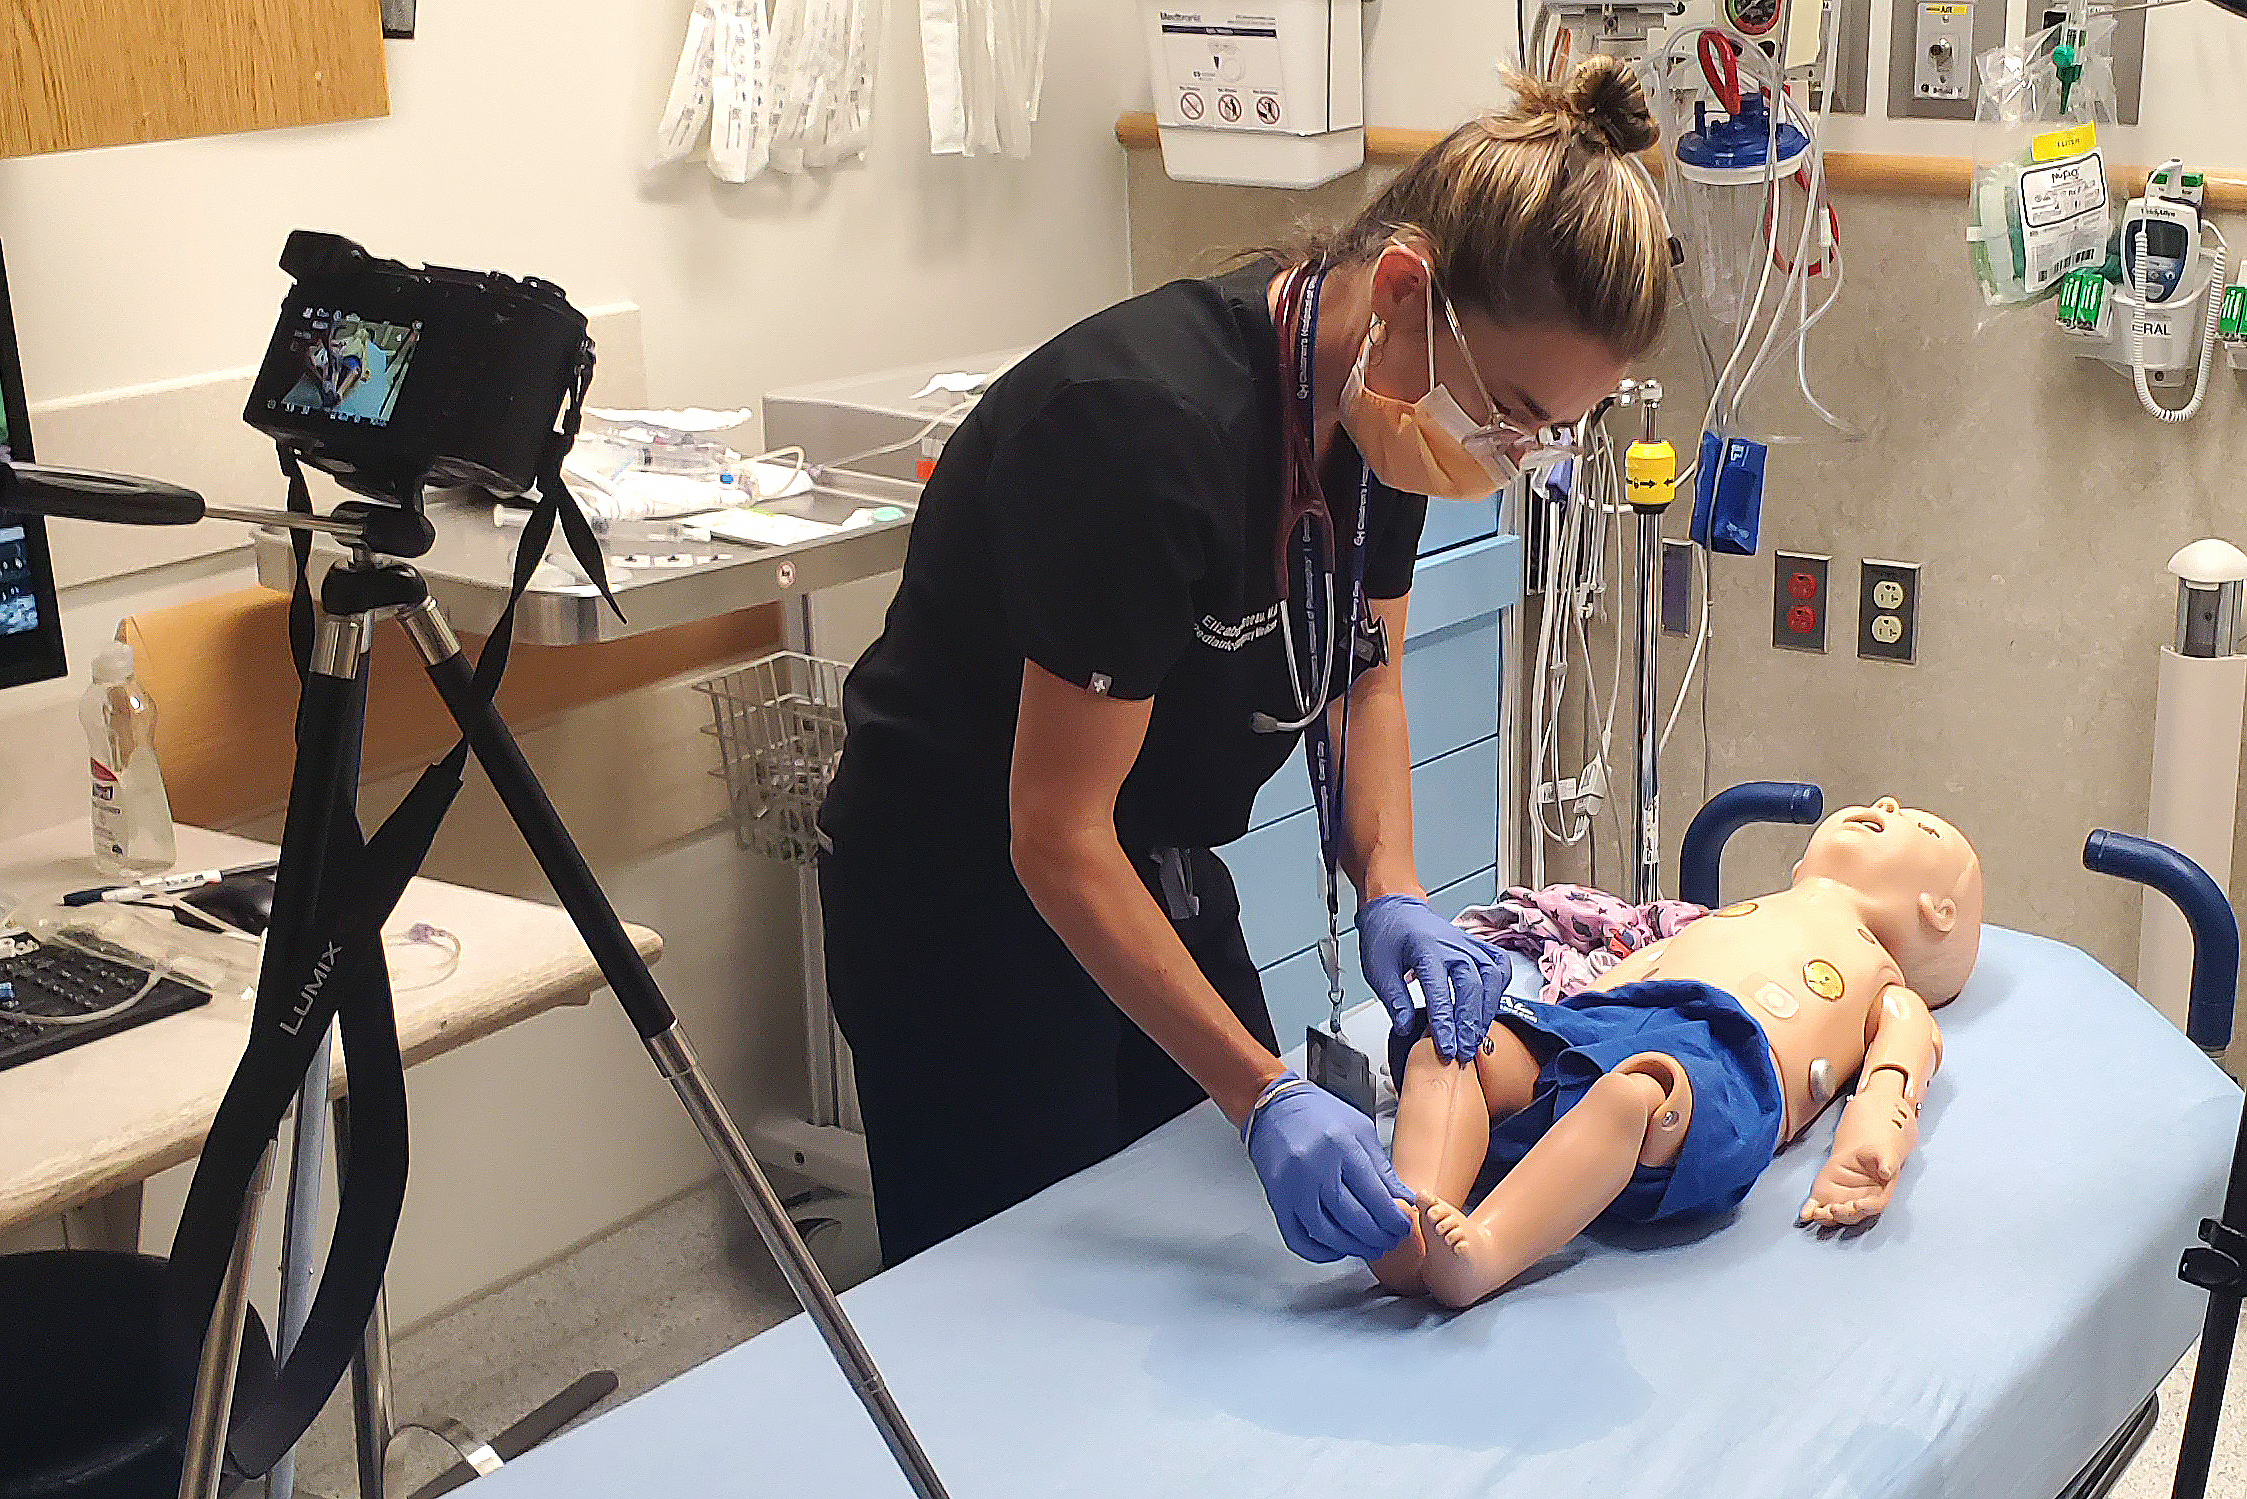 A video camera records Elizabeth Sanseau practicing medical care on a mannequin. (Image courtesy of Kyle Cassidy)